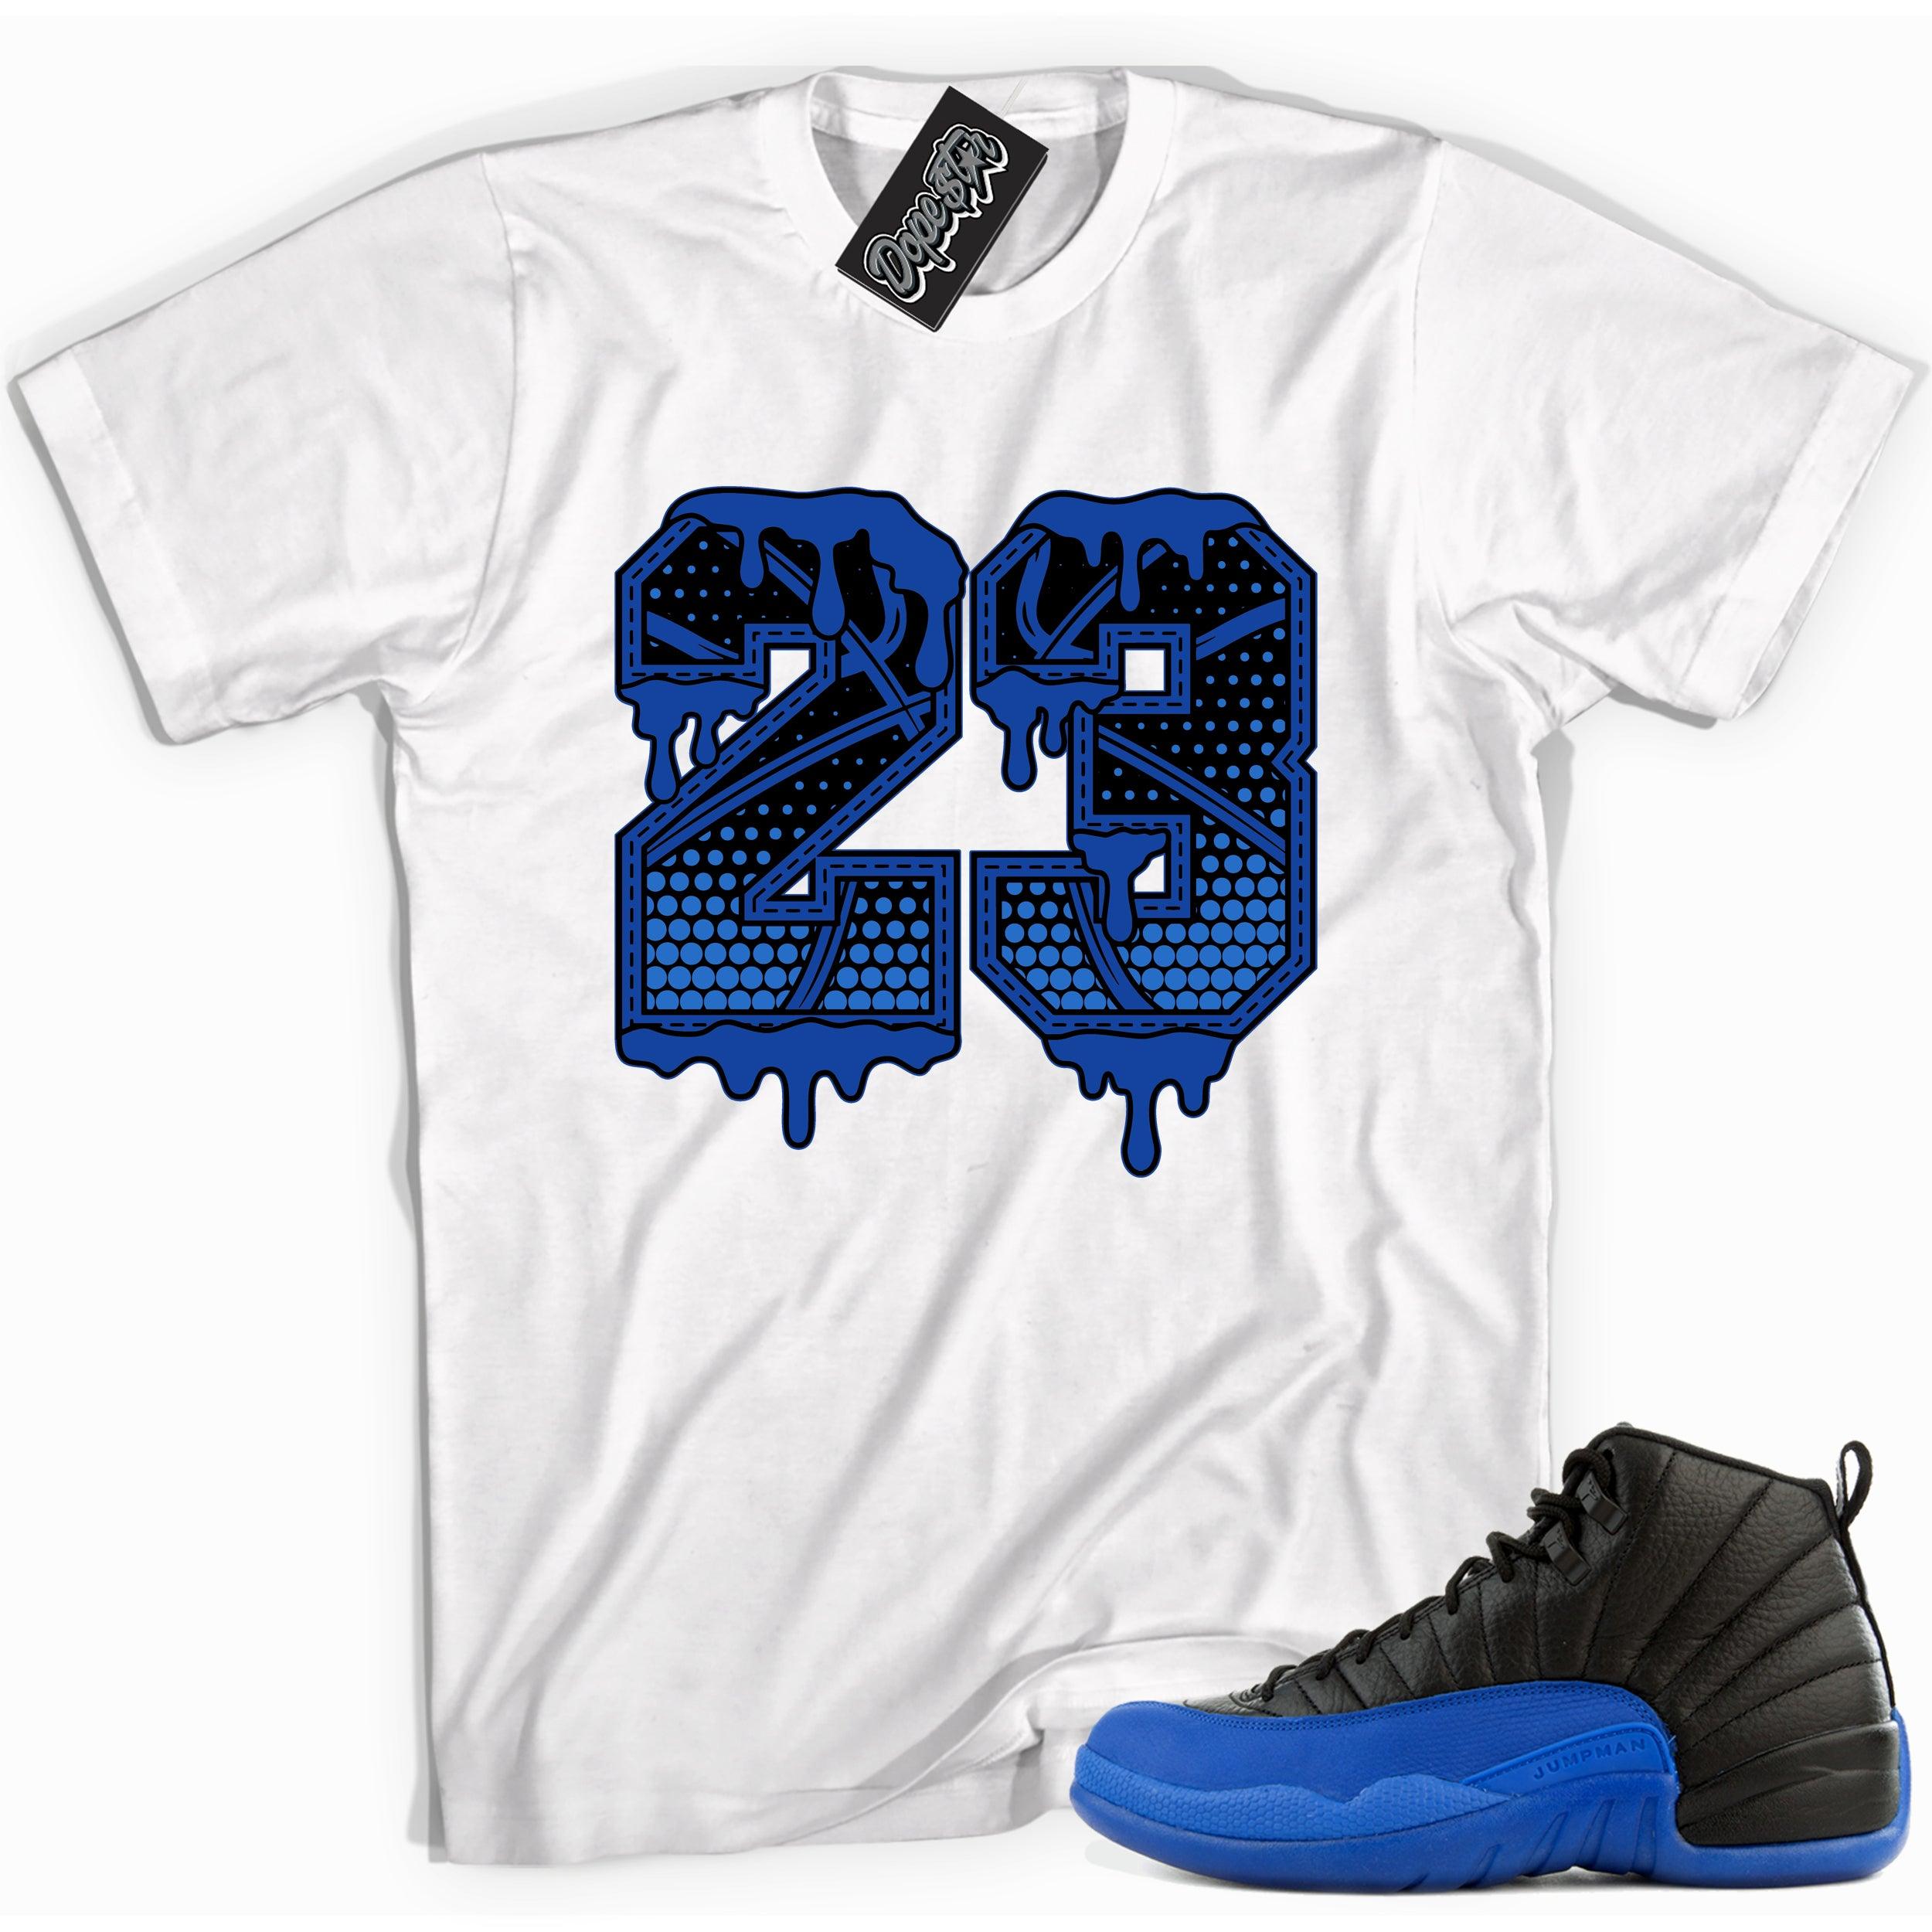 Cool white graphic tee with '23 basketball' print, that perfectly matches Air Jordan 12 Retro Black Game Royal sneakers.